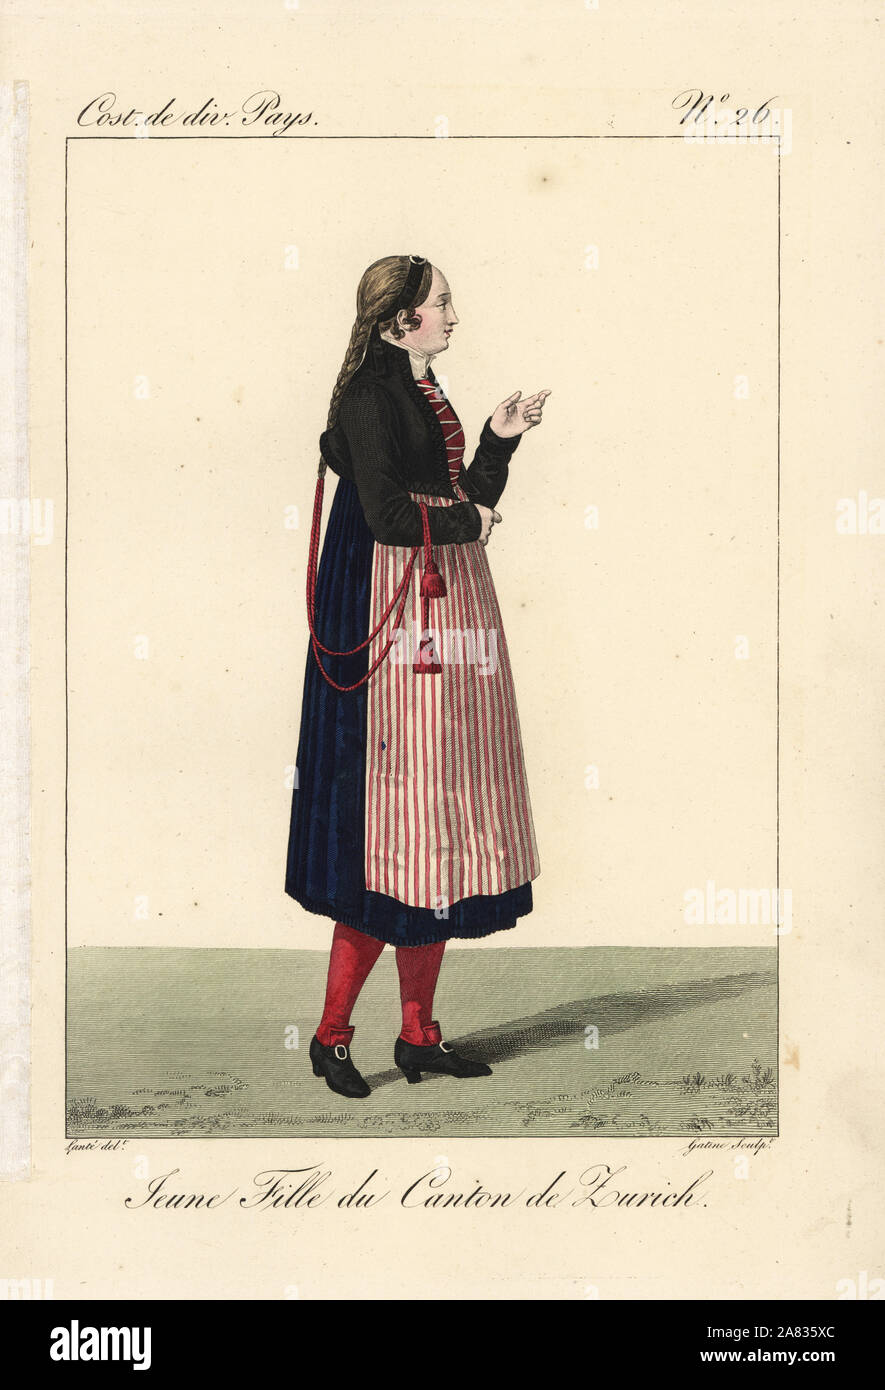 Young woman of the Canton of Zurich, Switzerland, 19th century. She wears a frogged bodice, striped apron, and long red tassels from her braided hair. Handcoloured copperplate engraving by Georges Jacques Gatine after an illustration by Louis Marie Lante from Costumes of Various Countries, Costumes de Divers Pays, Paris, 1827. Stock Photo